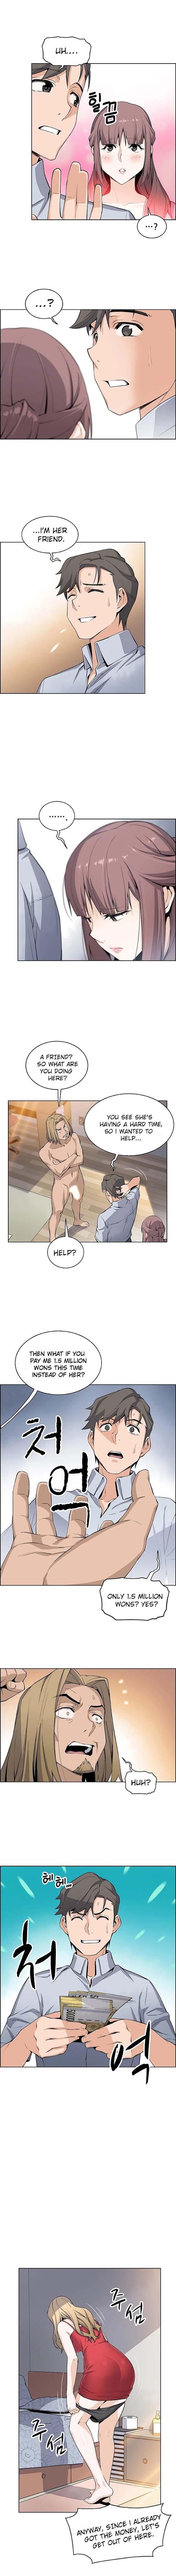 Housekeeper [Neck Pillow, Paper] Ch.49/49 [English] [Manhwa PDF] Completed 218